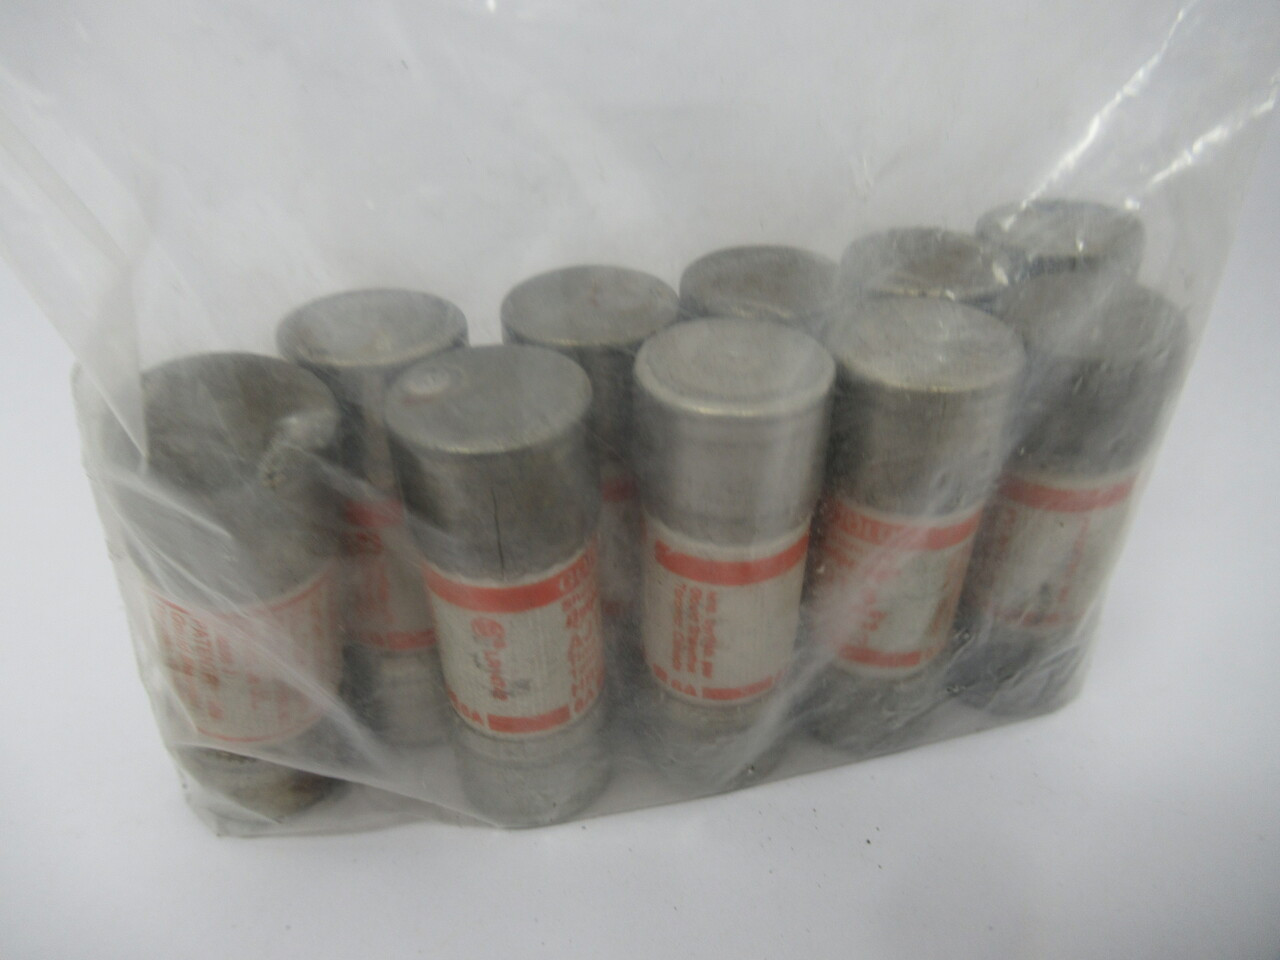 Gould Shawmut AJT6 Time Delay Fuse 6A 600VAC Lot of 10 USED